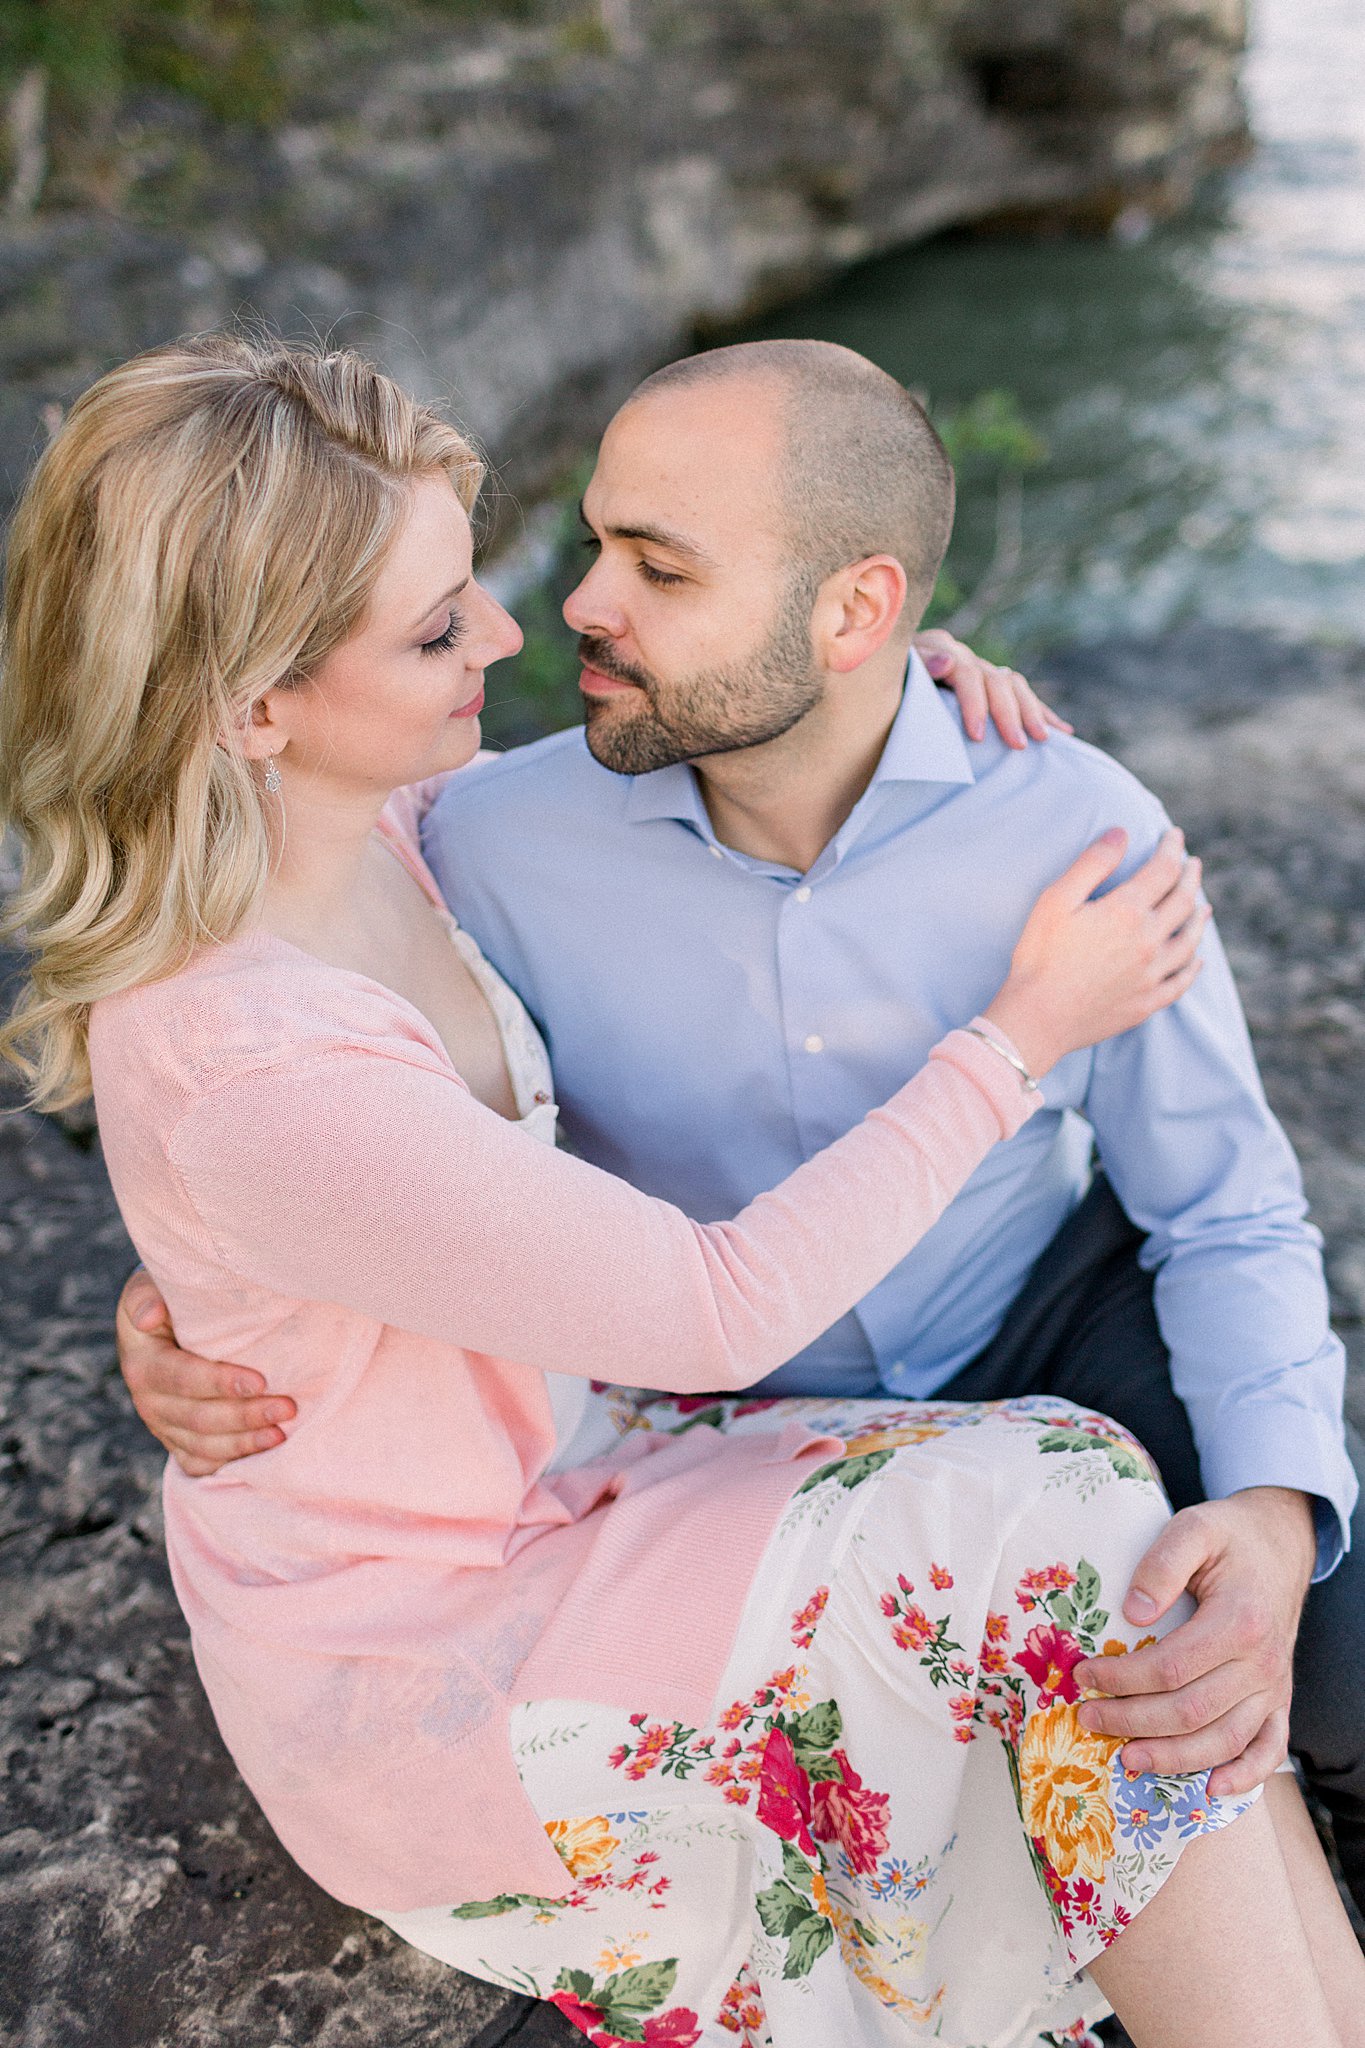 Cave Point Engagement Session